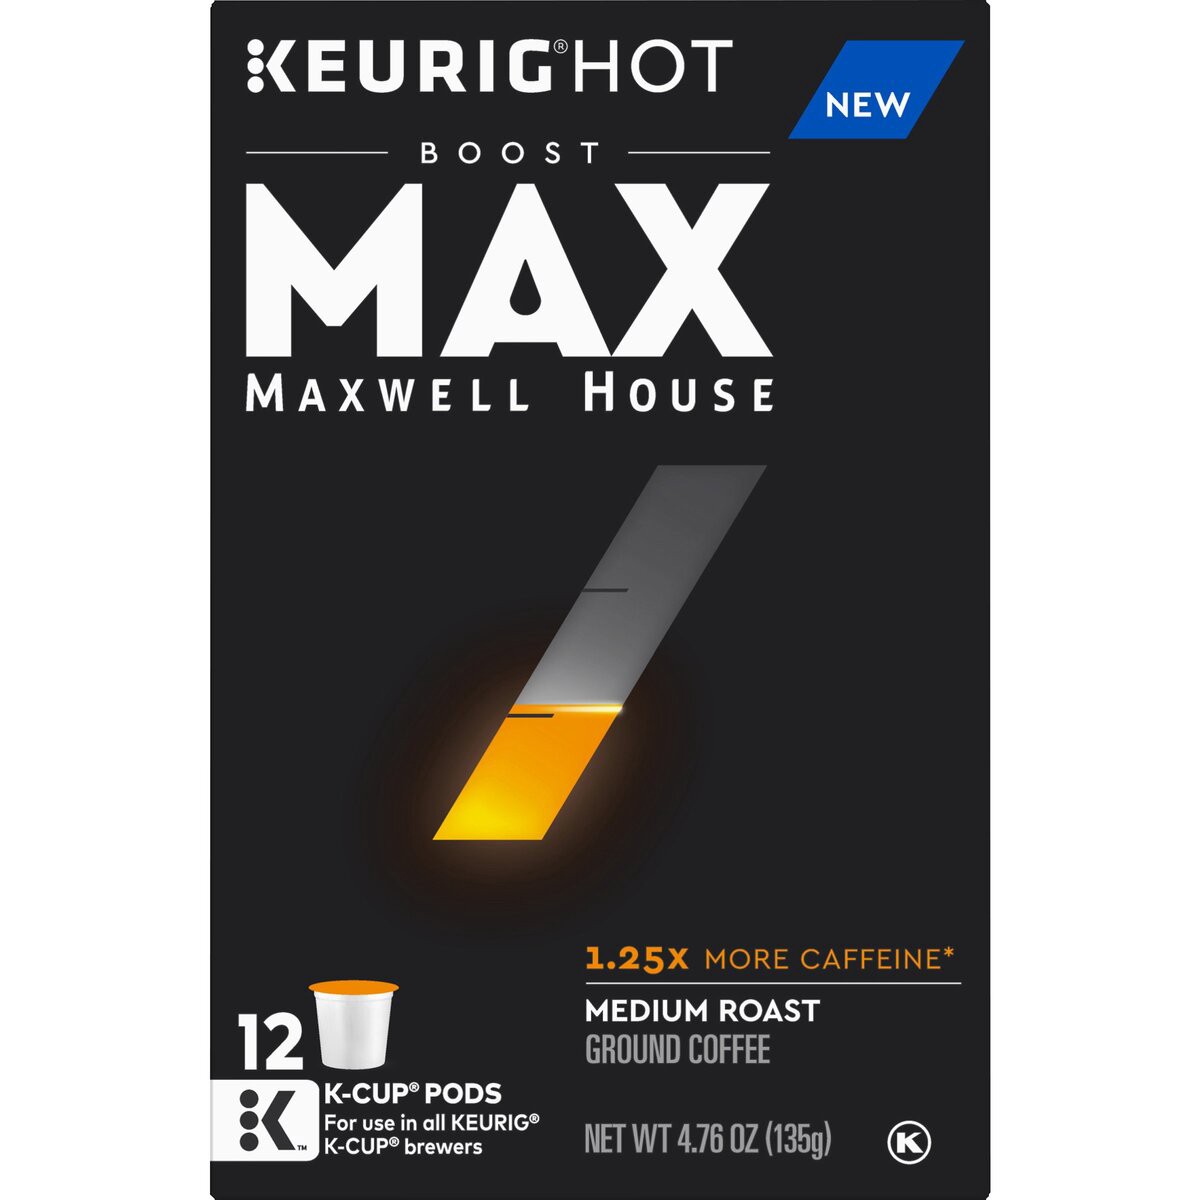 slide 4 of 8, Maxwell House Max Boost Medium Roast K-Cup Coffee Pods with 1.25X More Caffeine, 12 ct Box, 12 ct